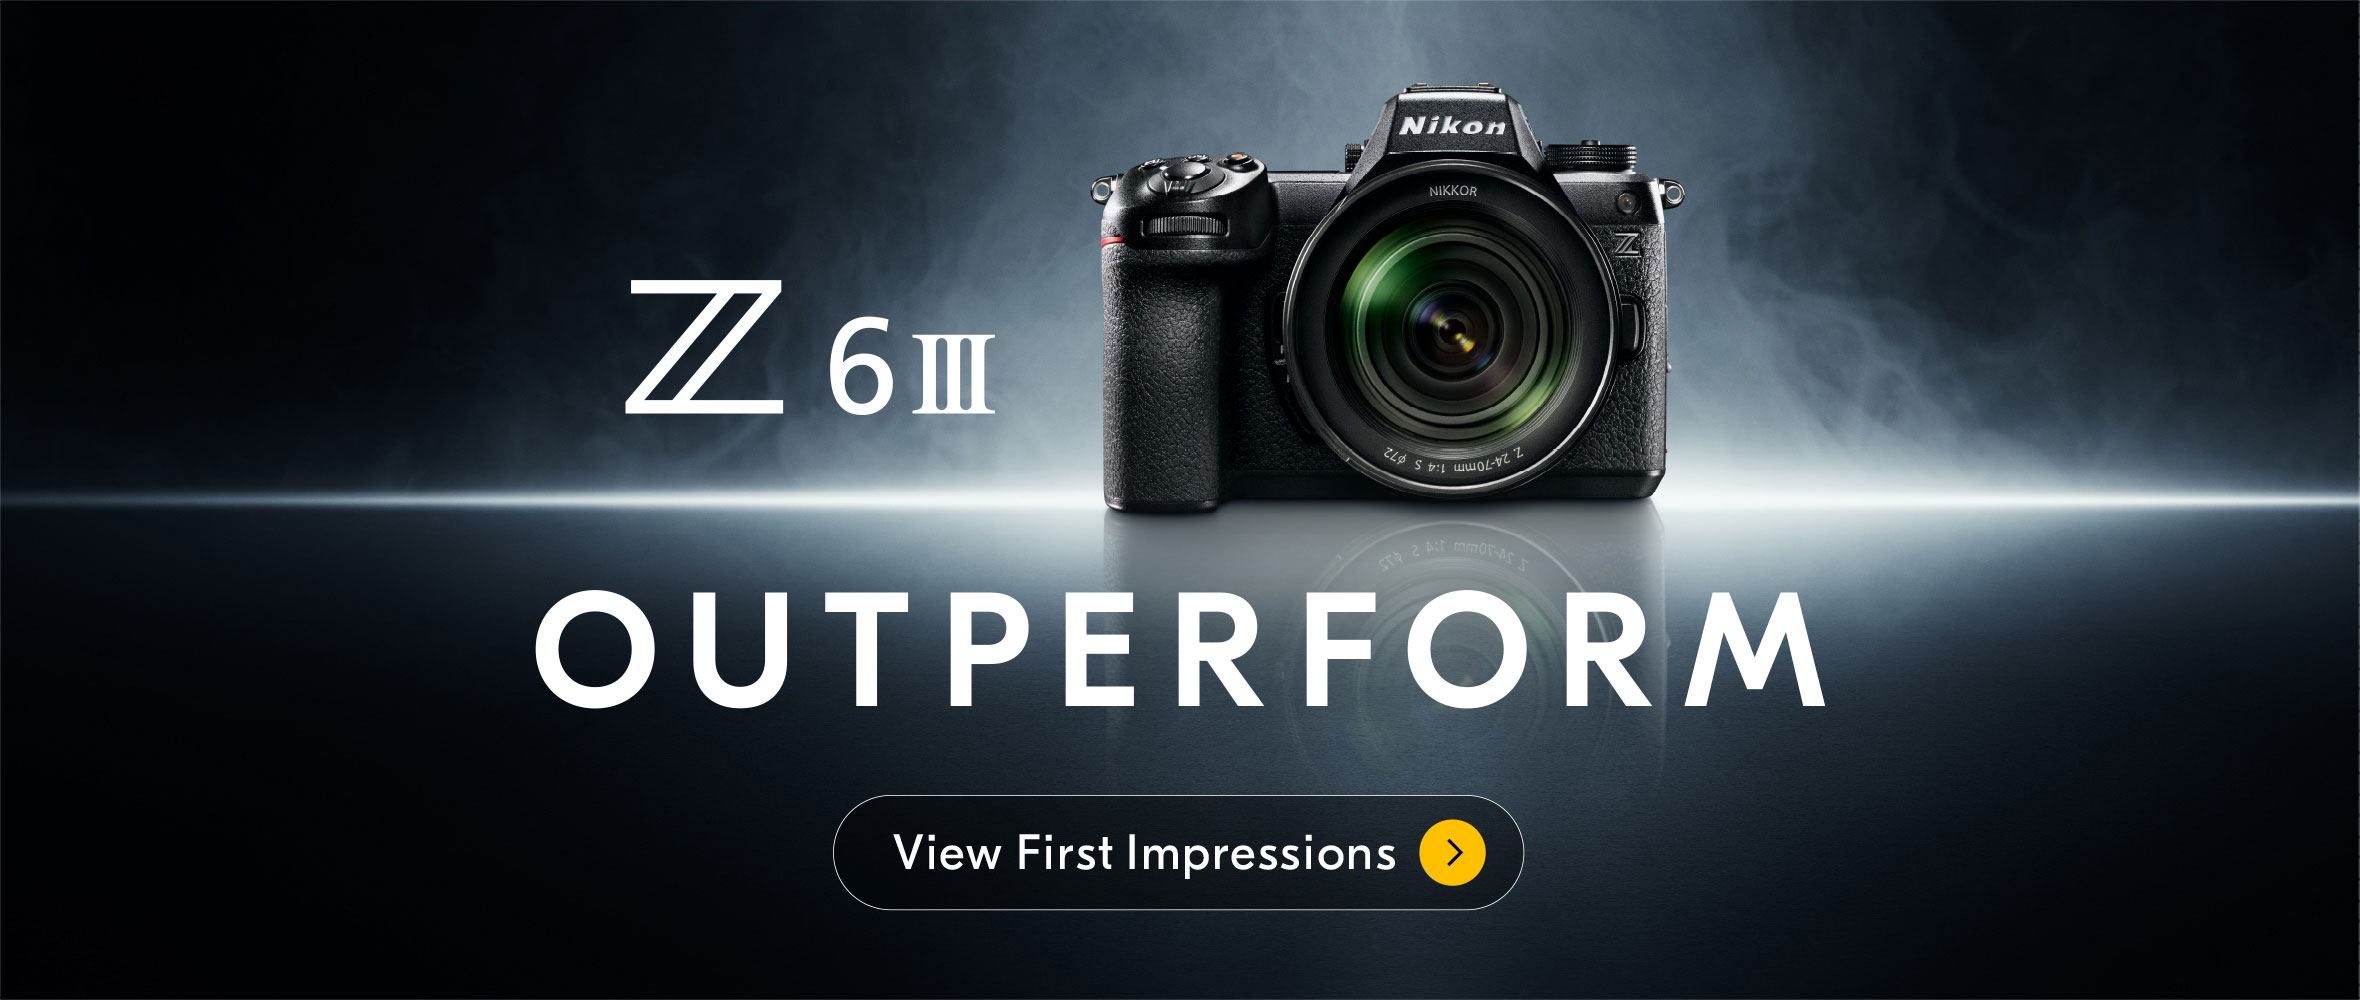 Z6III OUTPERFORM View First Impressions